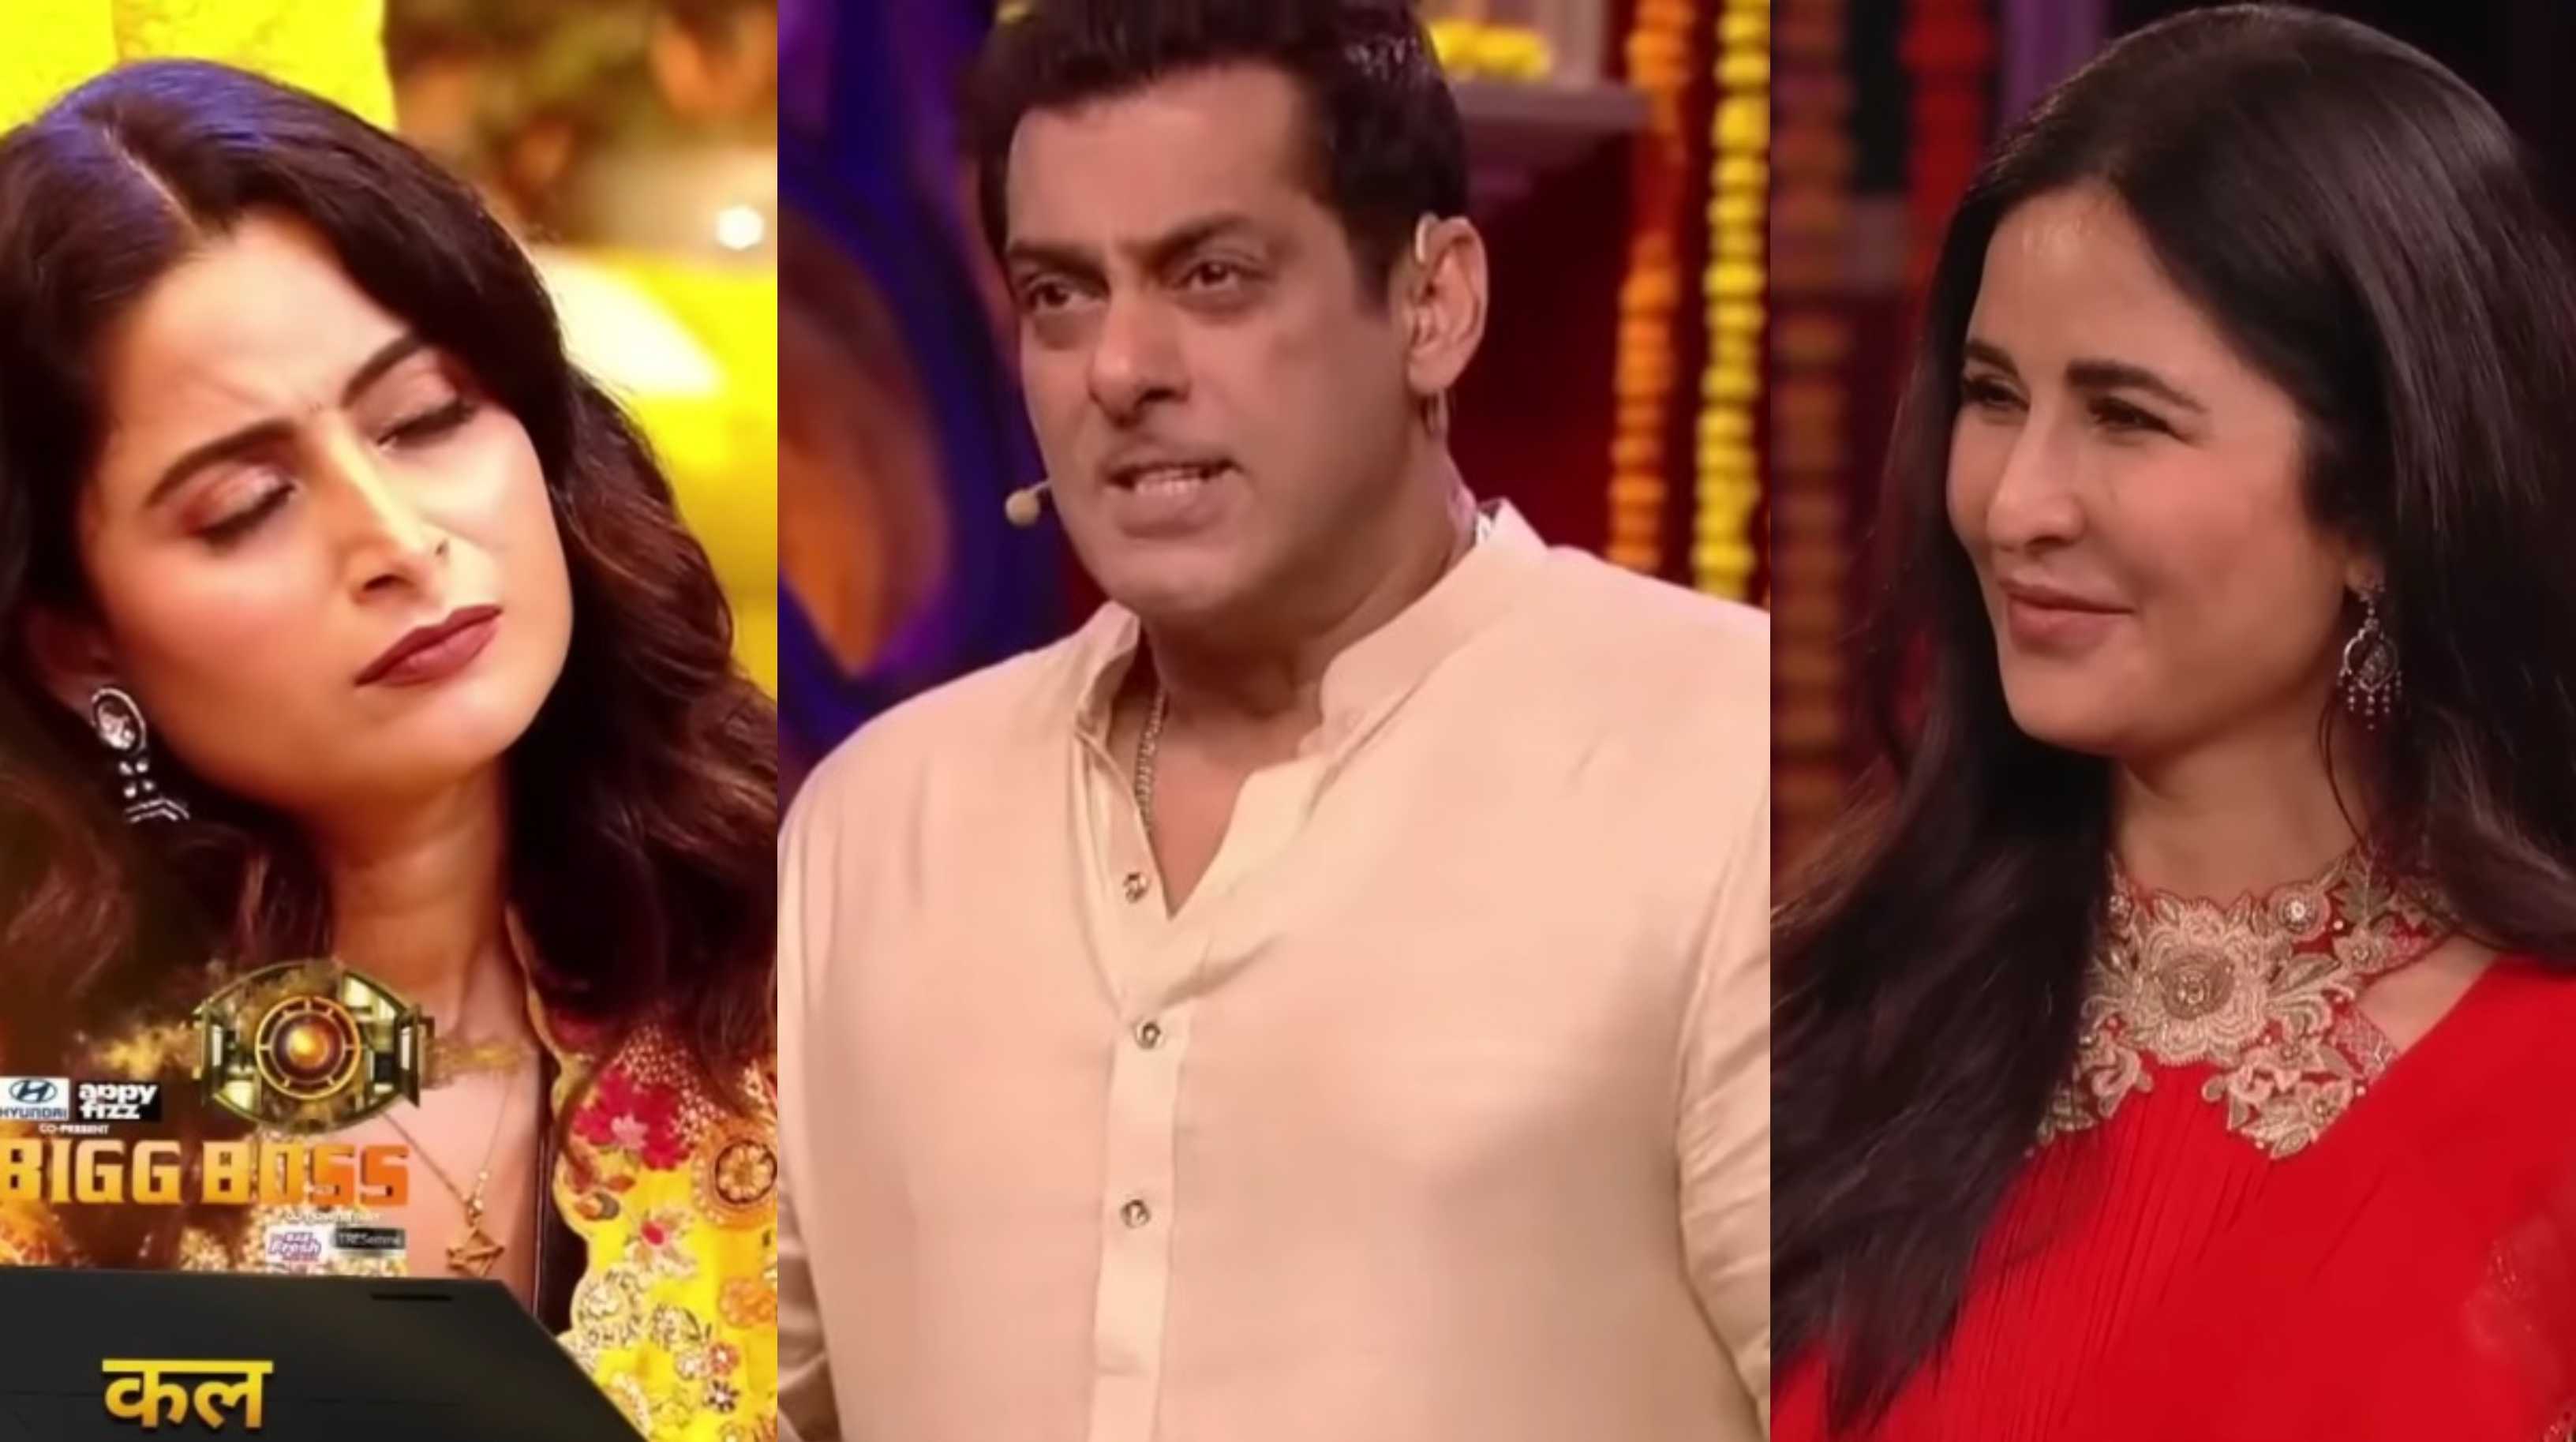 Bigg Boss 17 Promo: Salman scolds Aishwarya, says relationship with Neil could turn toxic; Katrina joins him for Diwali